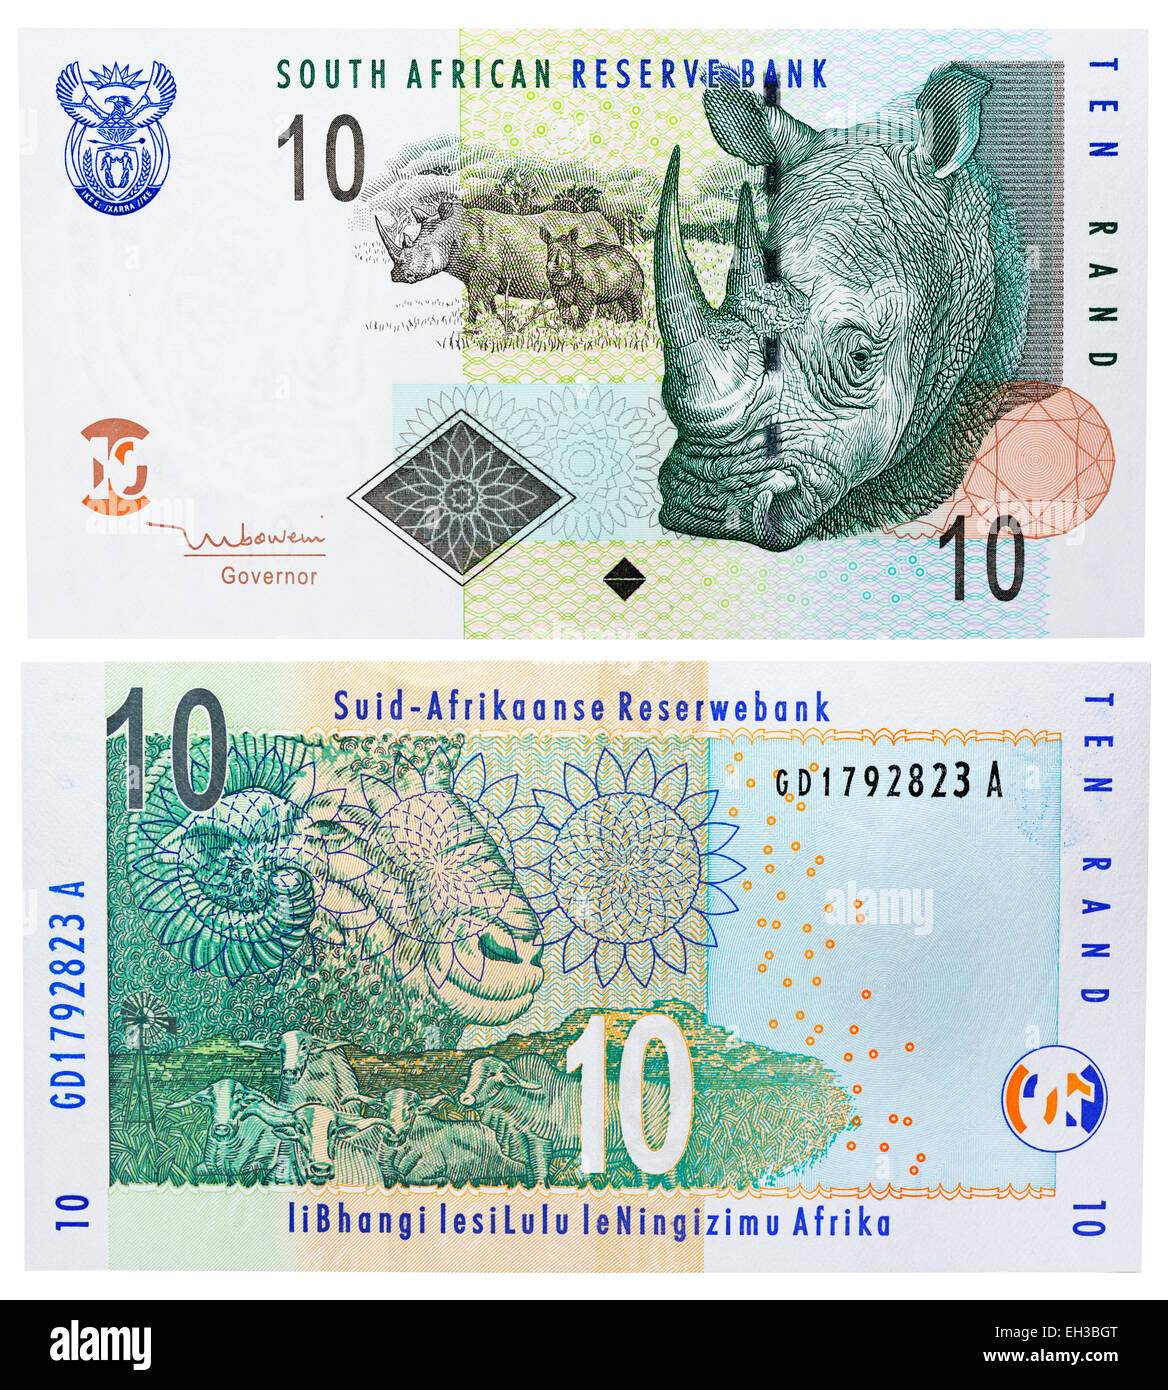 10 rand banknote, White Rhinoceros, South Africa, 2005 Stock Photo